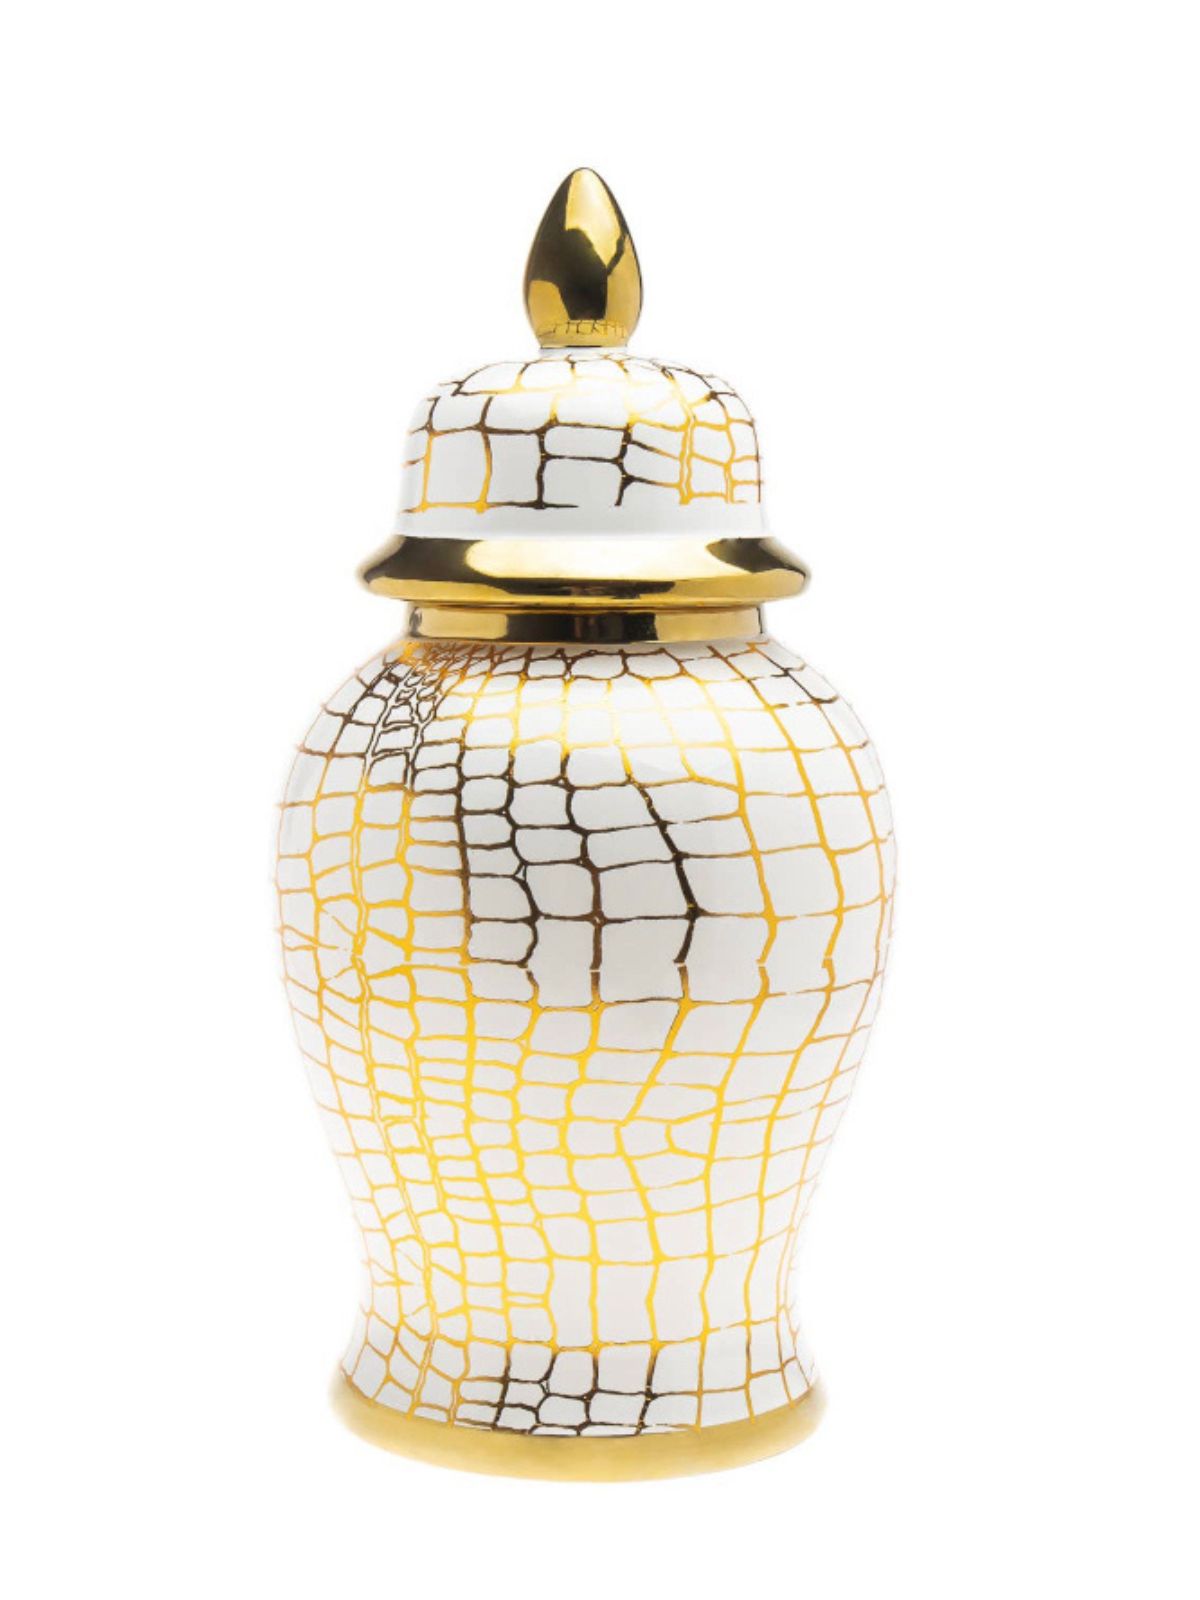 Snake Print Porcelain Ginger Jar with an elegant gold-tone rim and base in size small